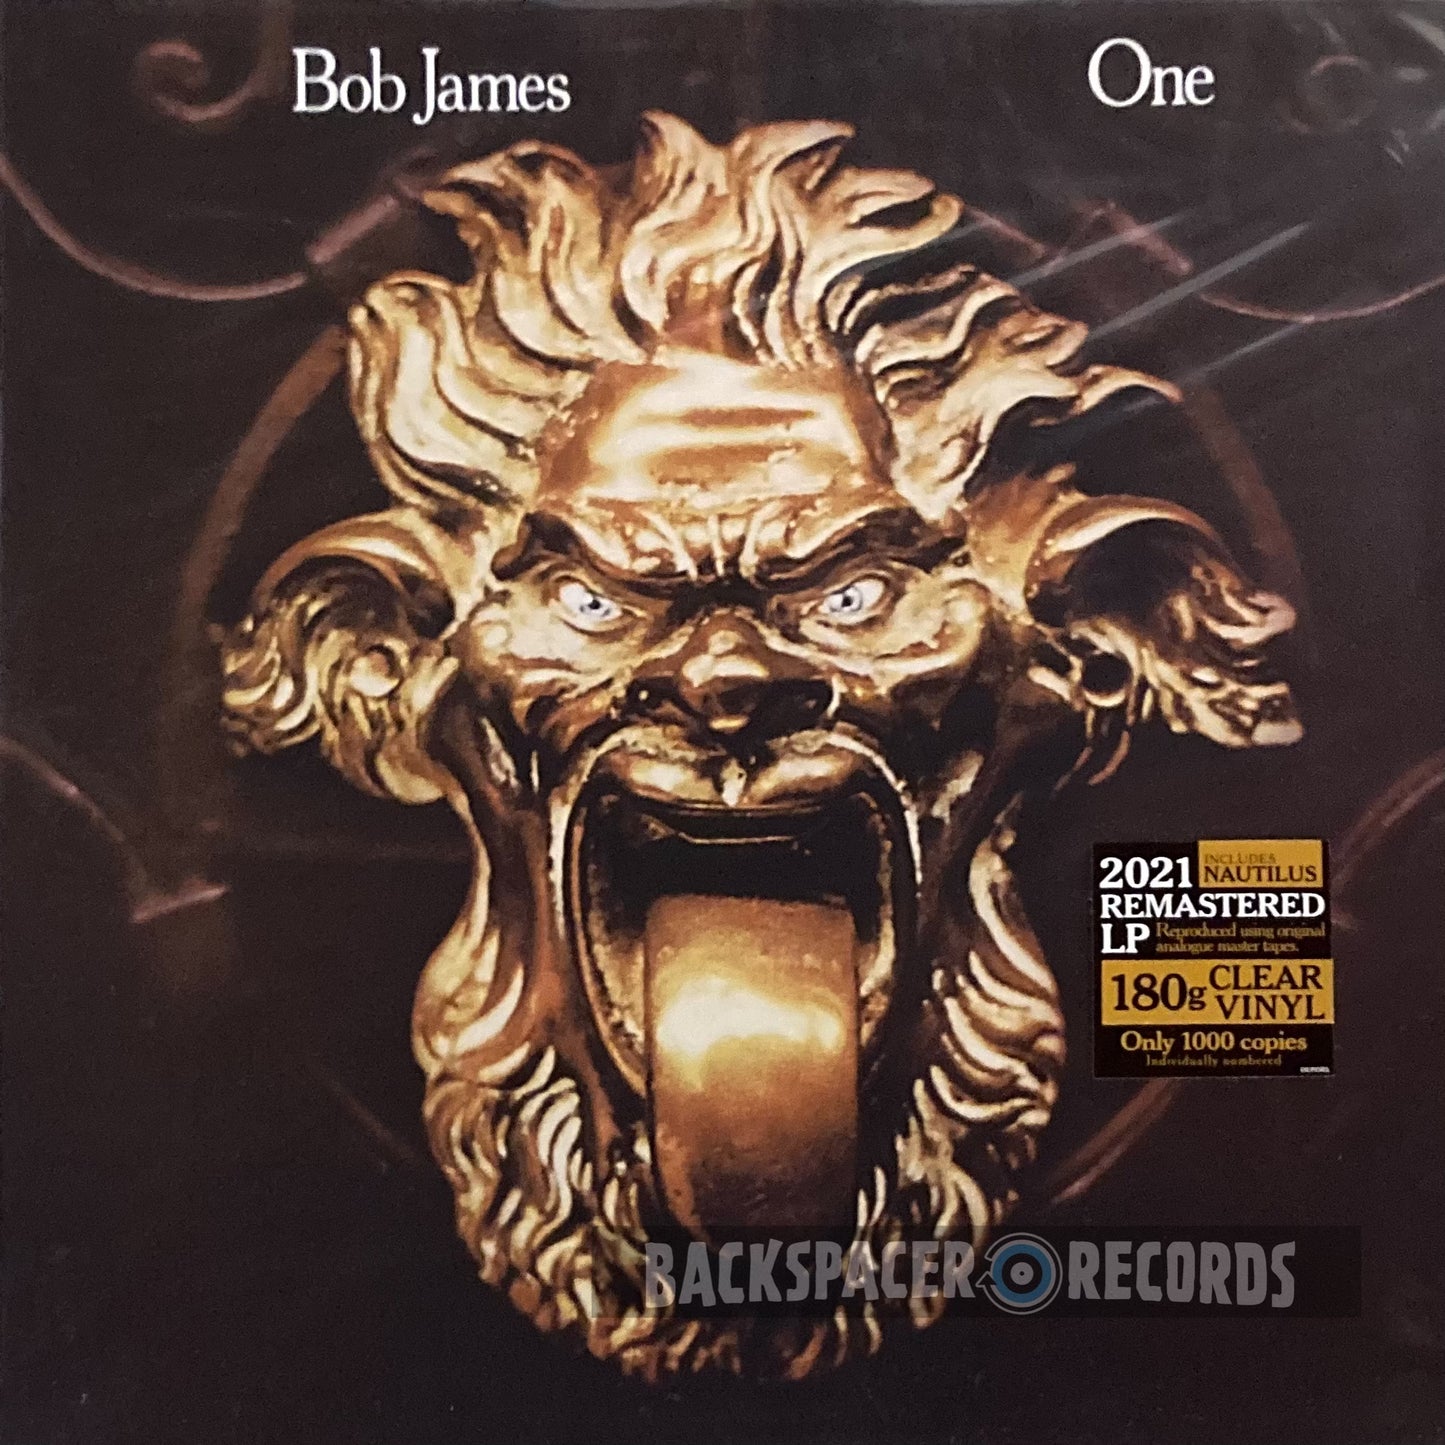 Bob James - One LP (Limited Edition)